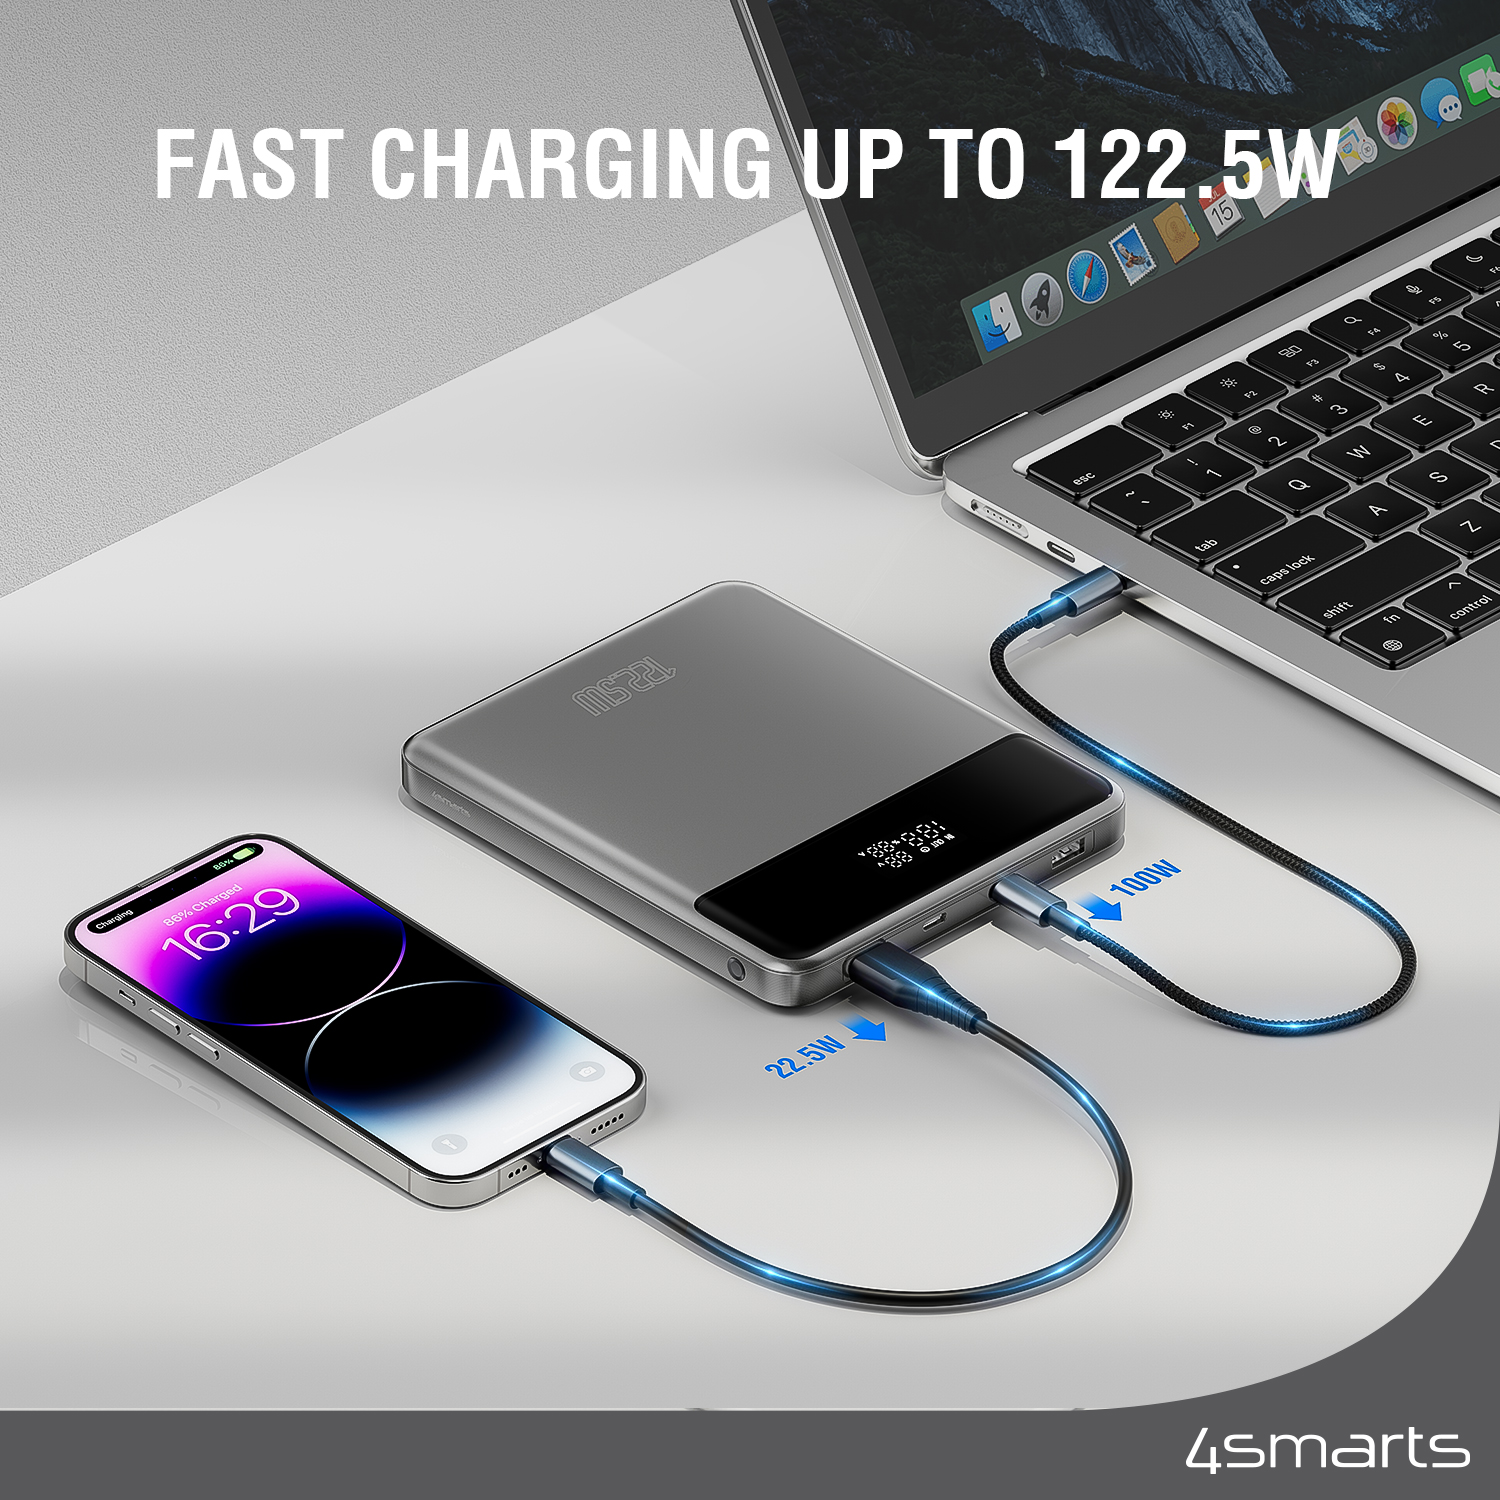 The 4smarts Powerbank Enterprise Slim 20000mAh supports fast charging up to 122.5W.